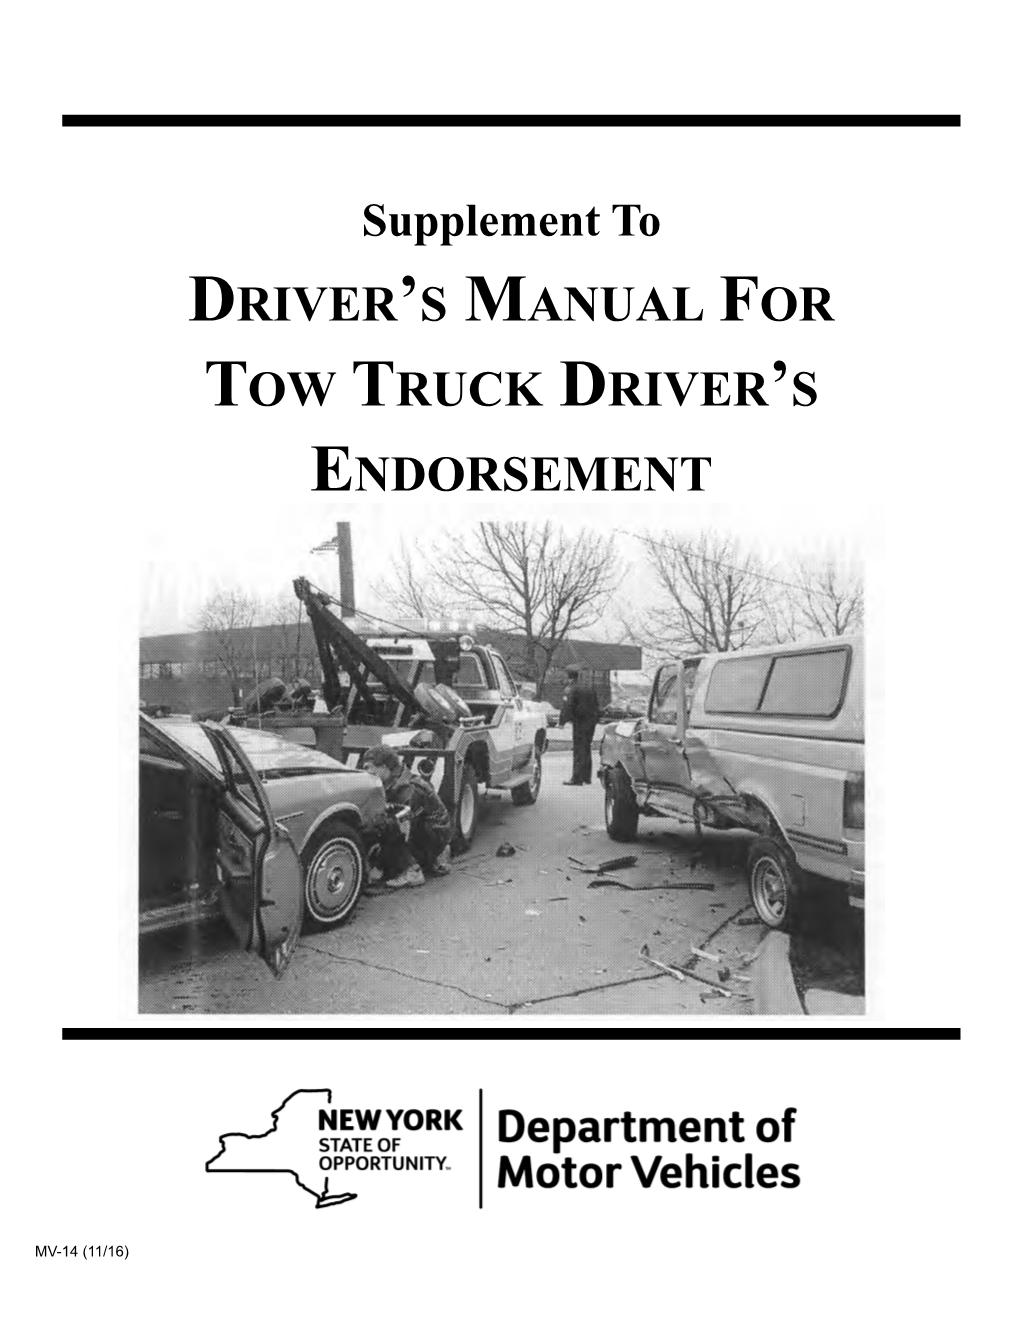 Supplement to Driver's Manual for Tow Truck Driver's Endorsement